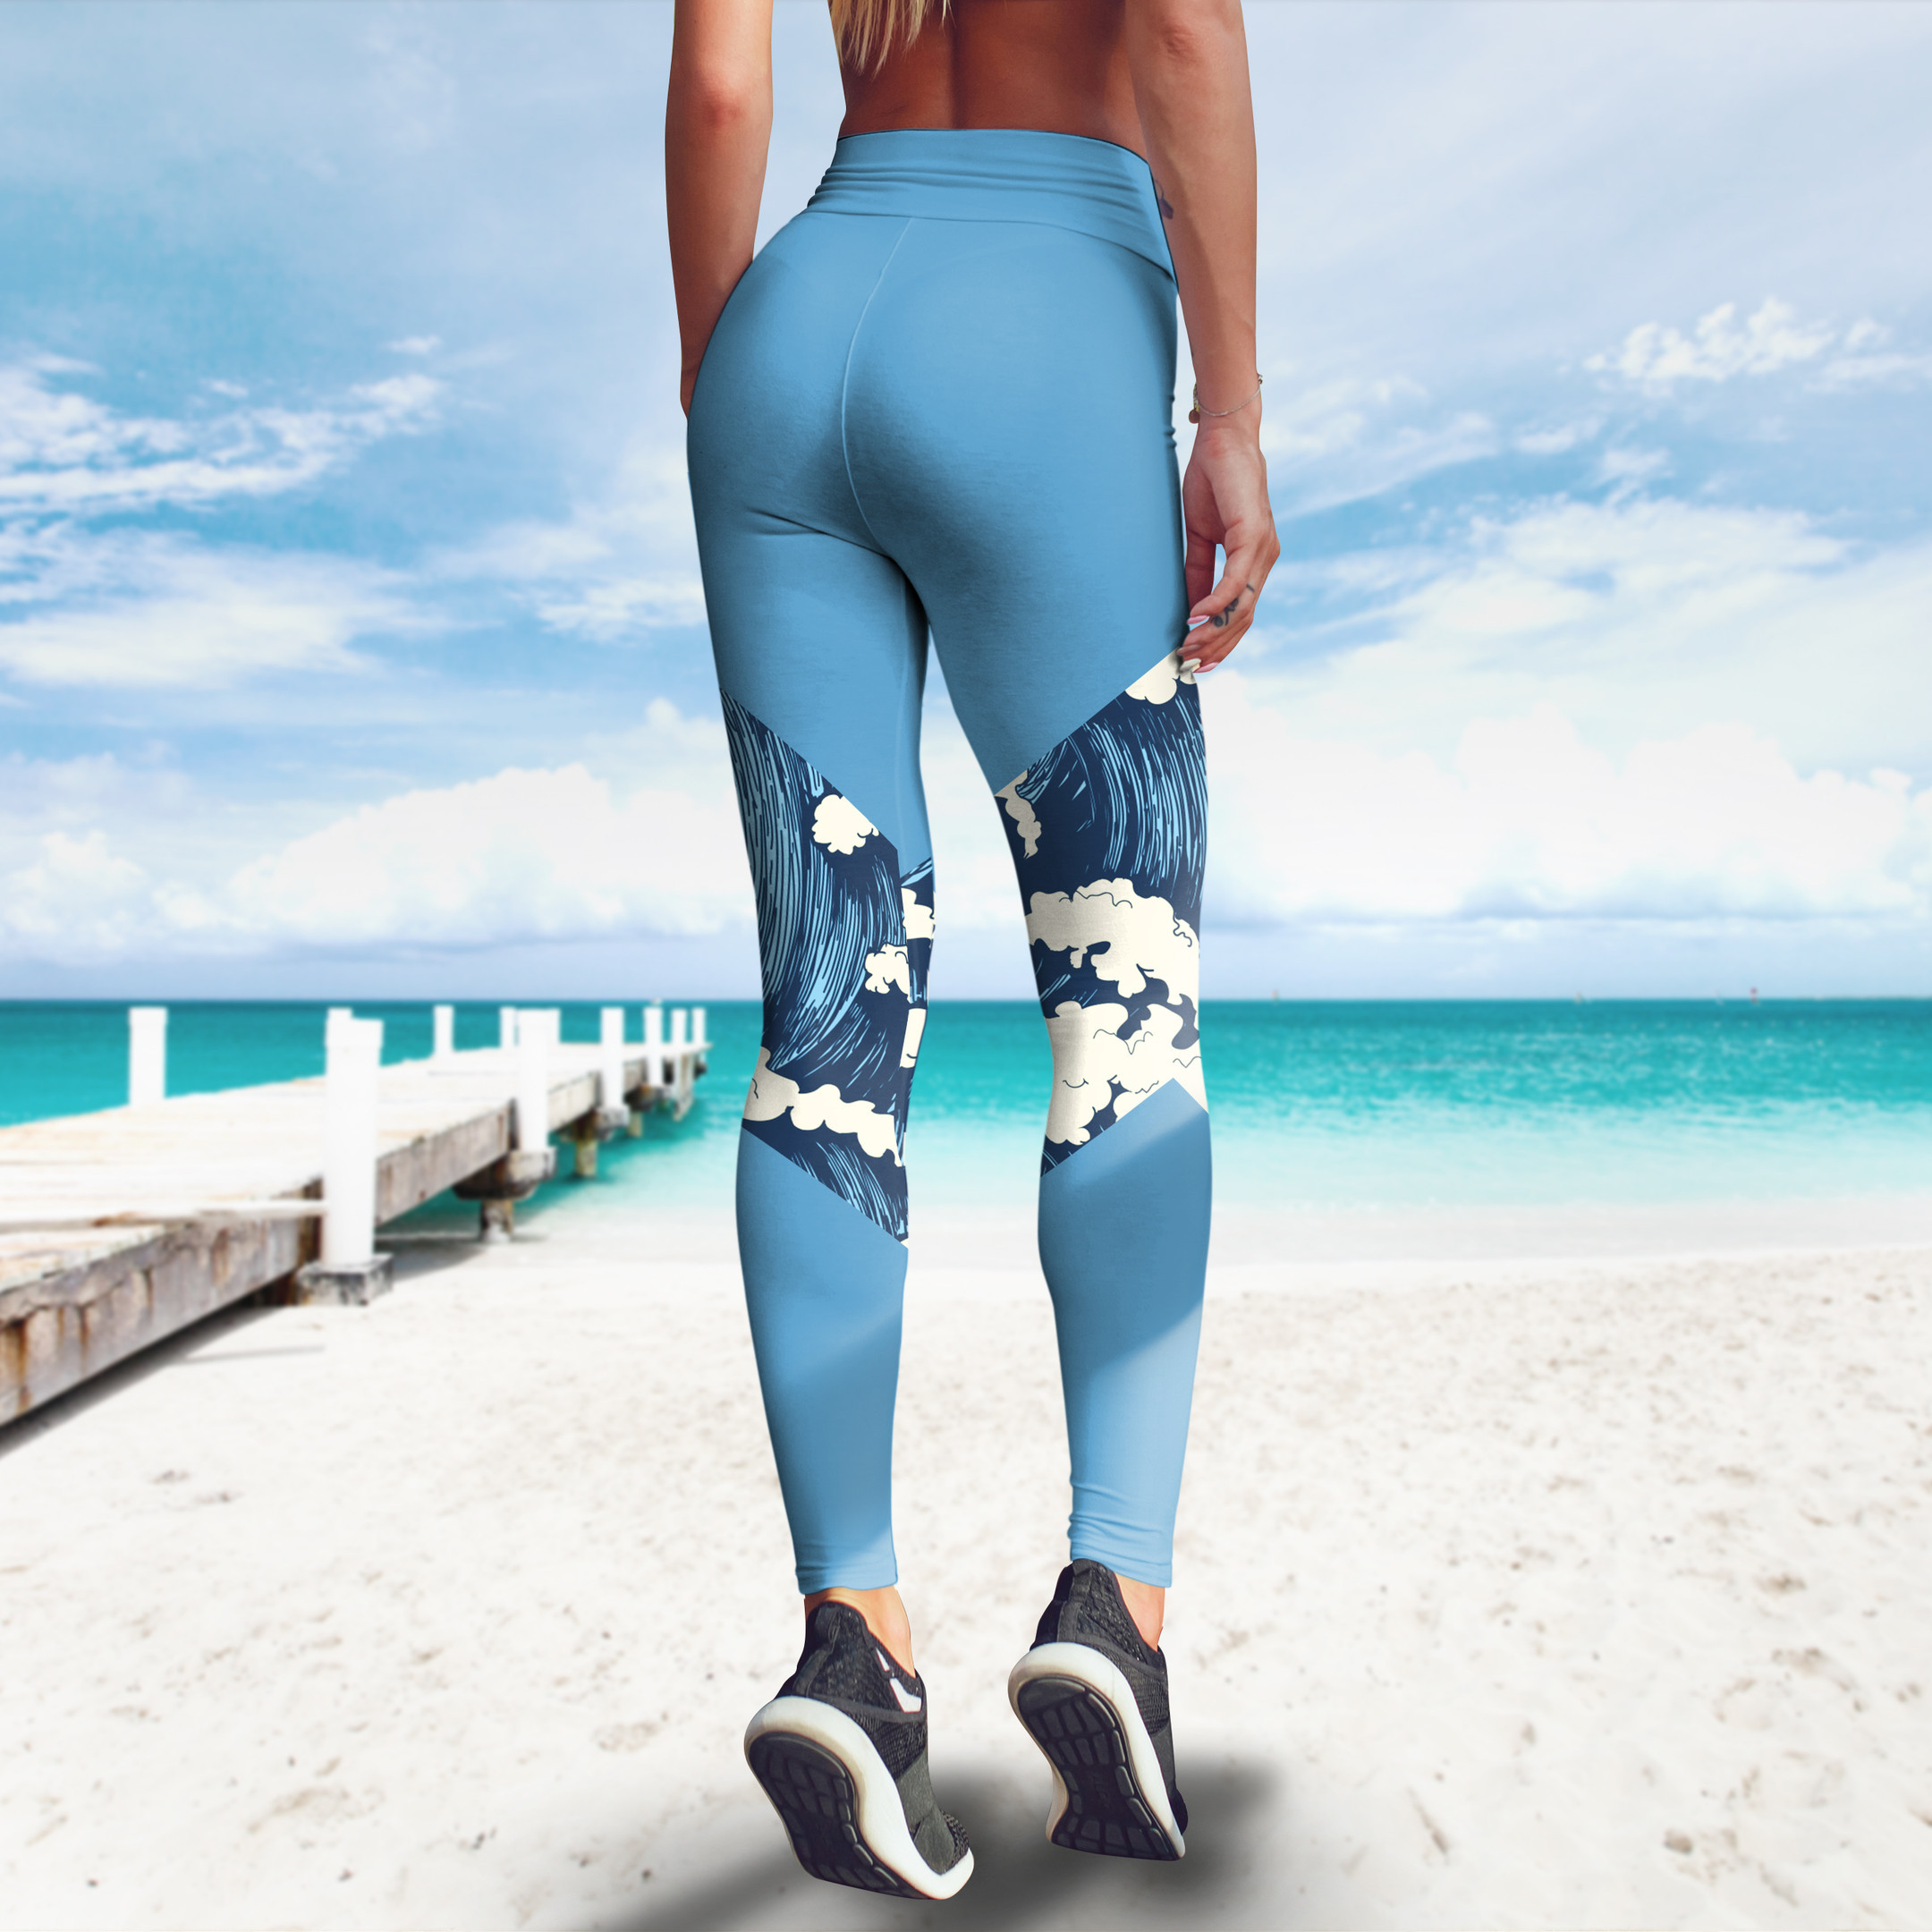 Waves Cartoon Pattern Surf Leggings High Wasted Surfing Workout Gym Pants Gift For Mom Wife